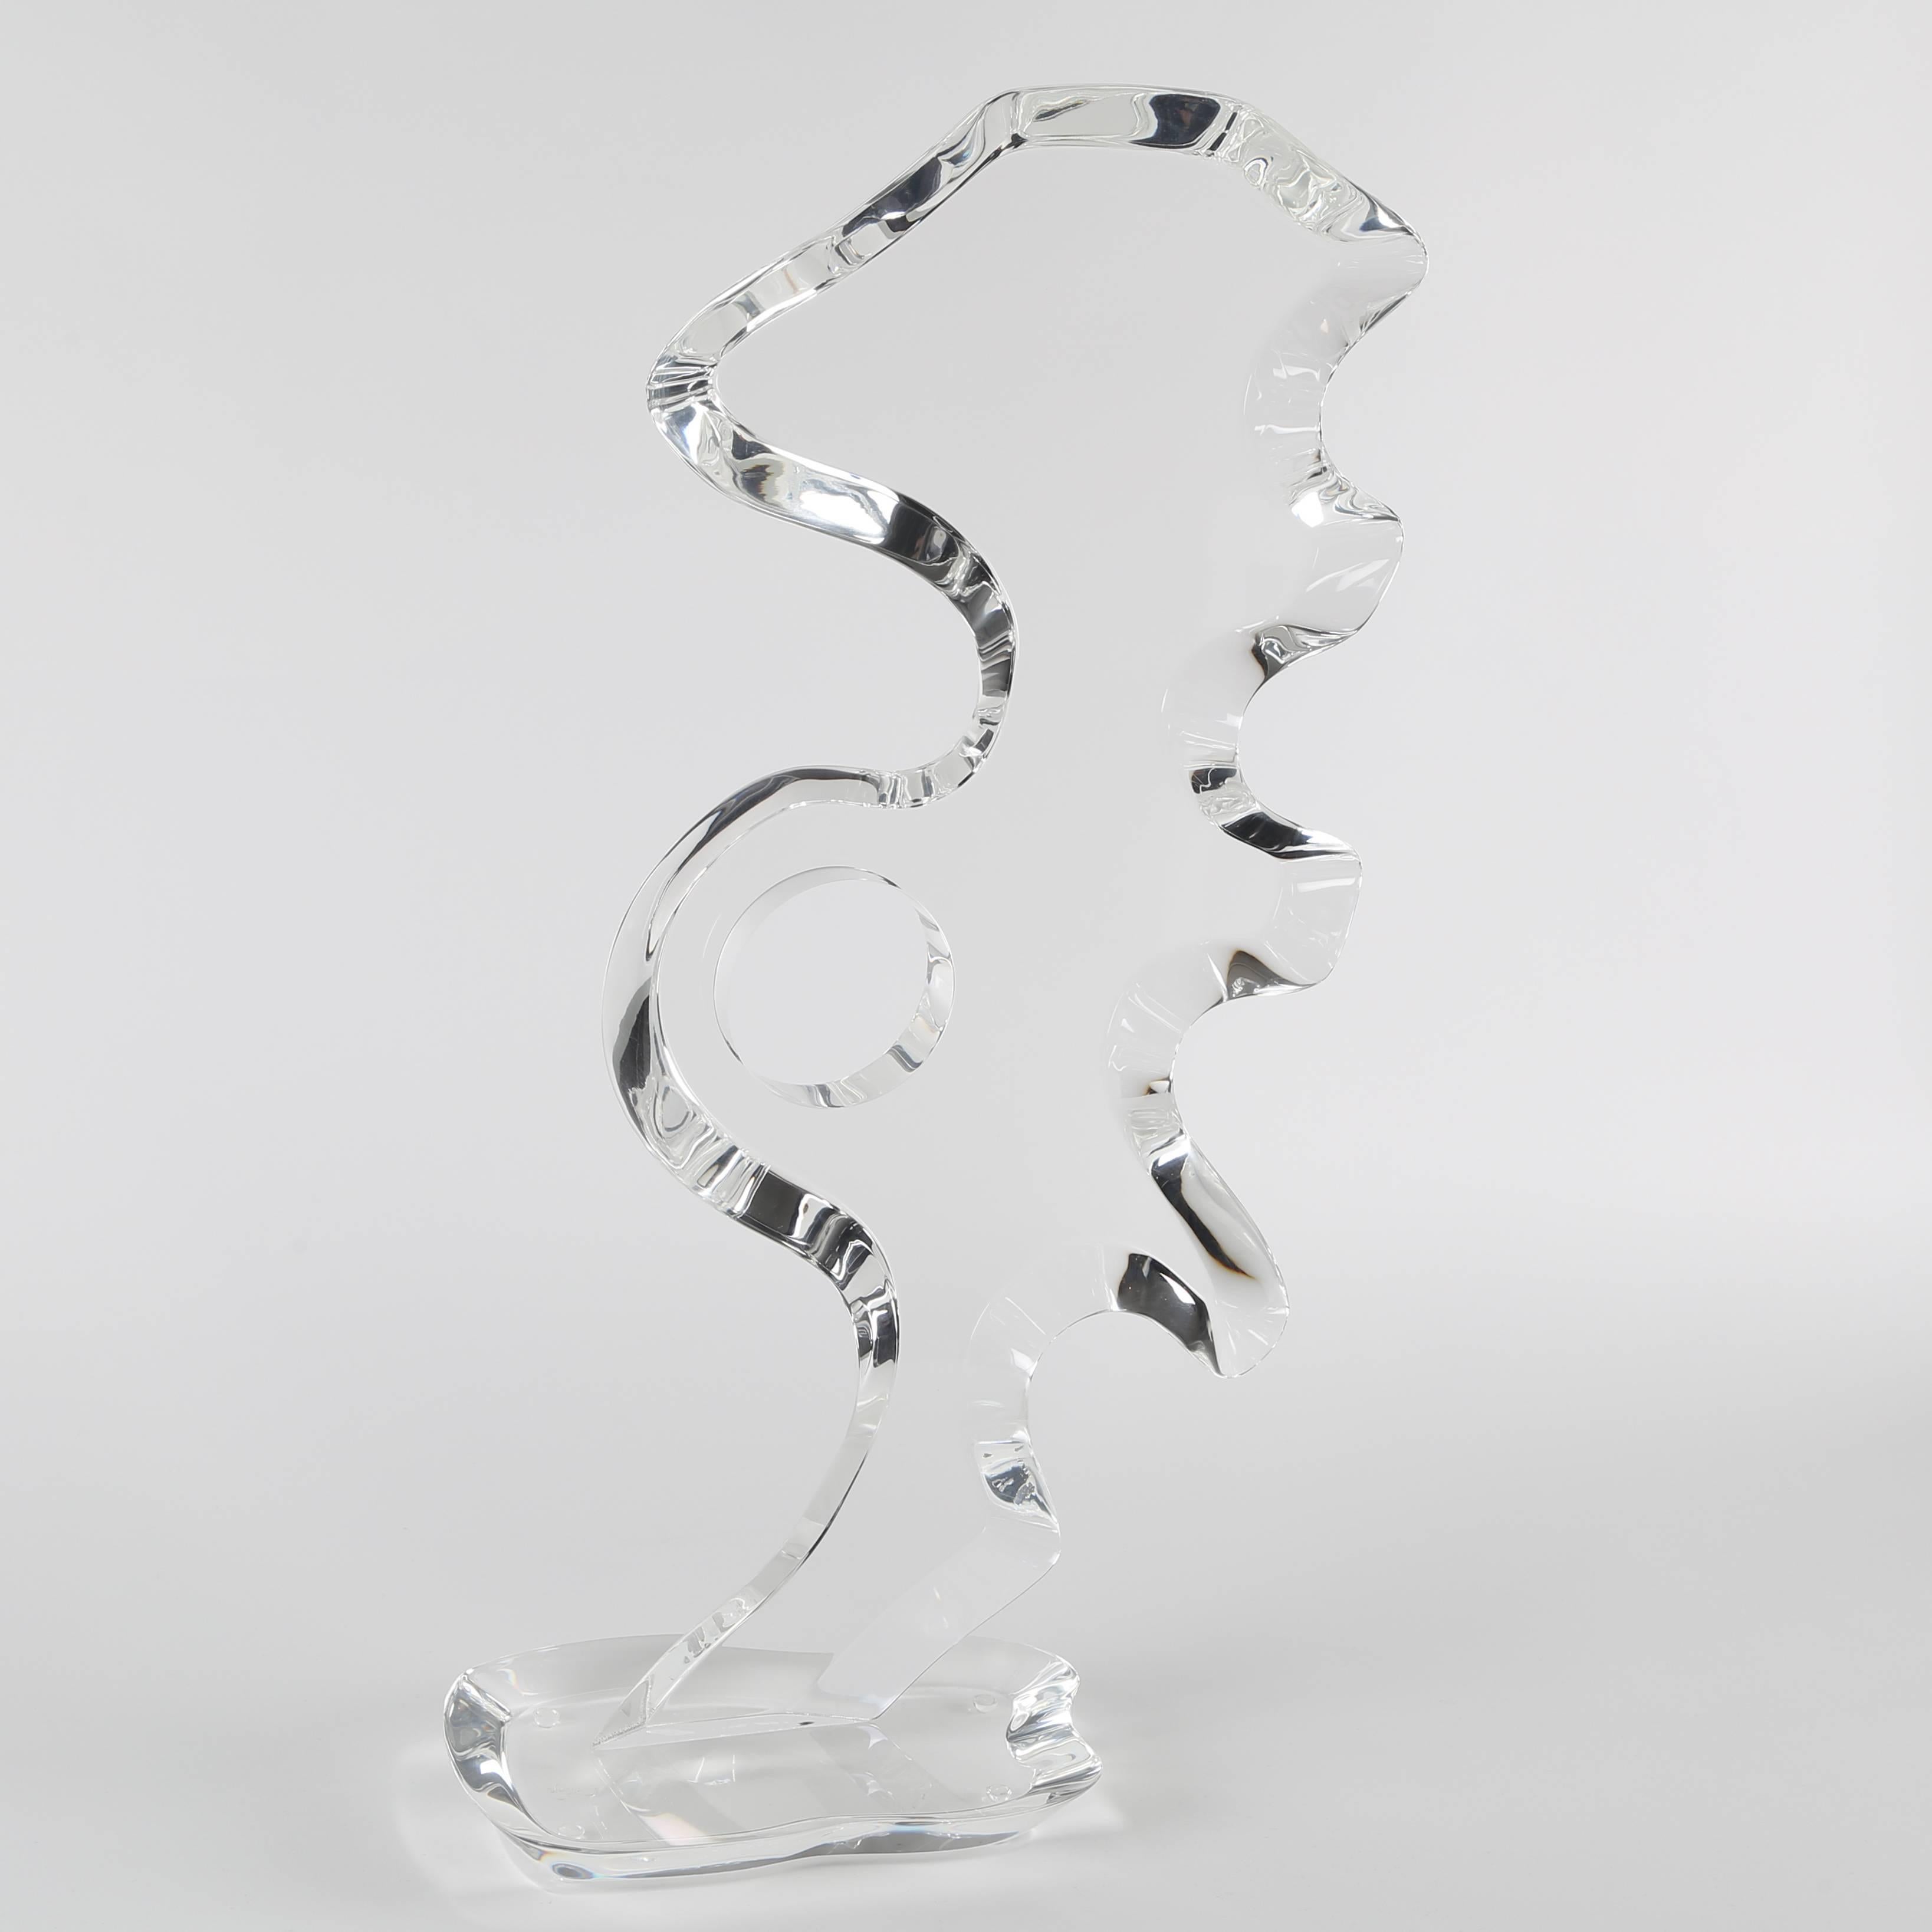 Polished acrylic abstract figural sculpture on biomorphic base, by Cuban-born Hivo Van Teal of Miami, circa 1970s. Extensive beveling to the Lucite results in interesting light refractions from every angle. Etched 